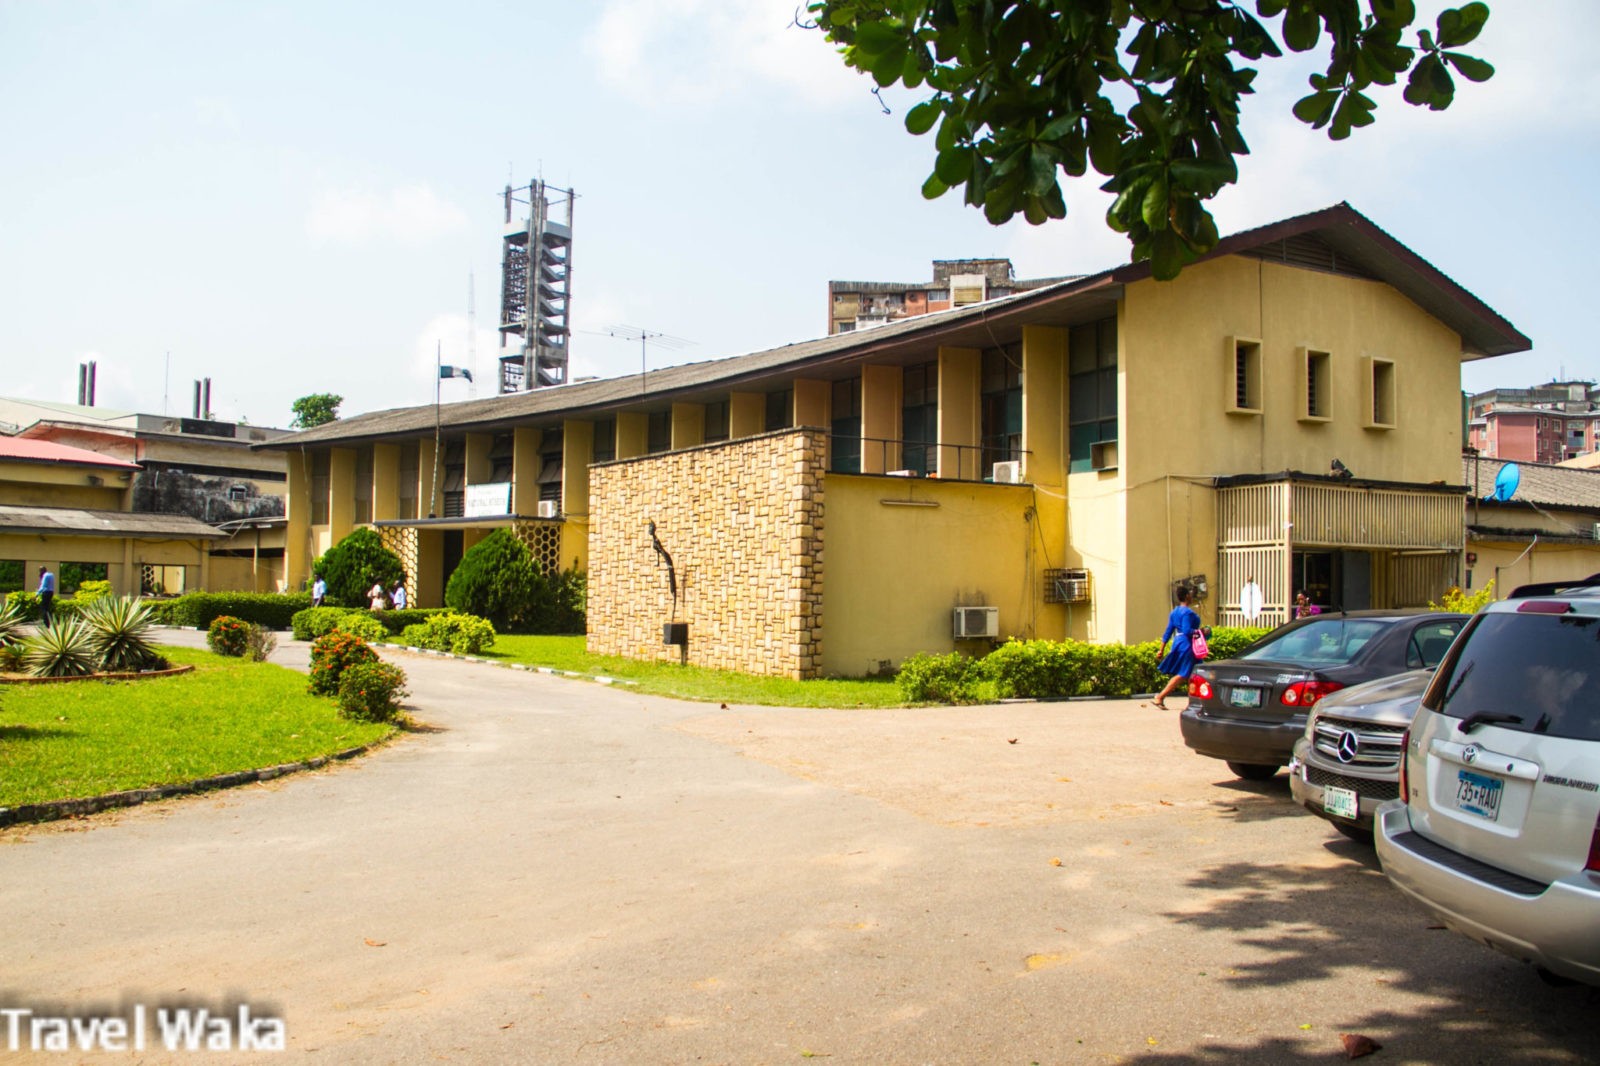 What You Need To Know About The National Museum Onikan, Lagos